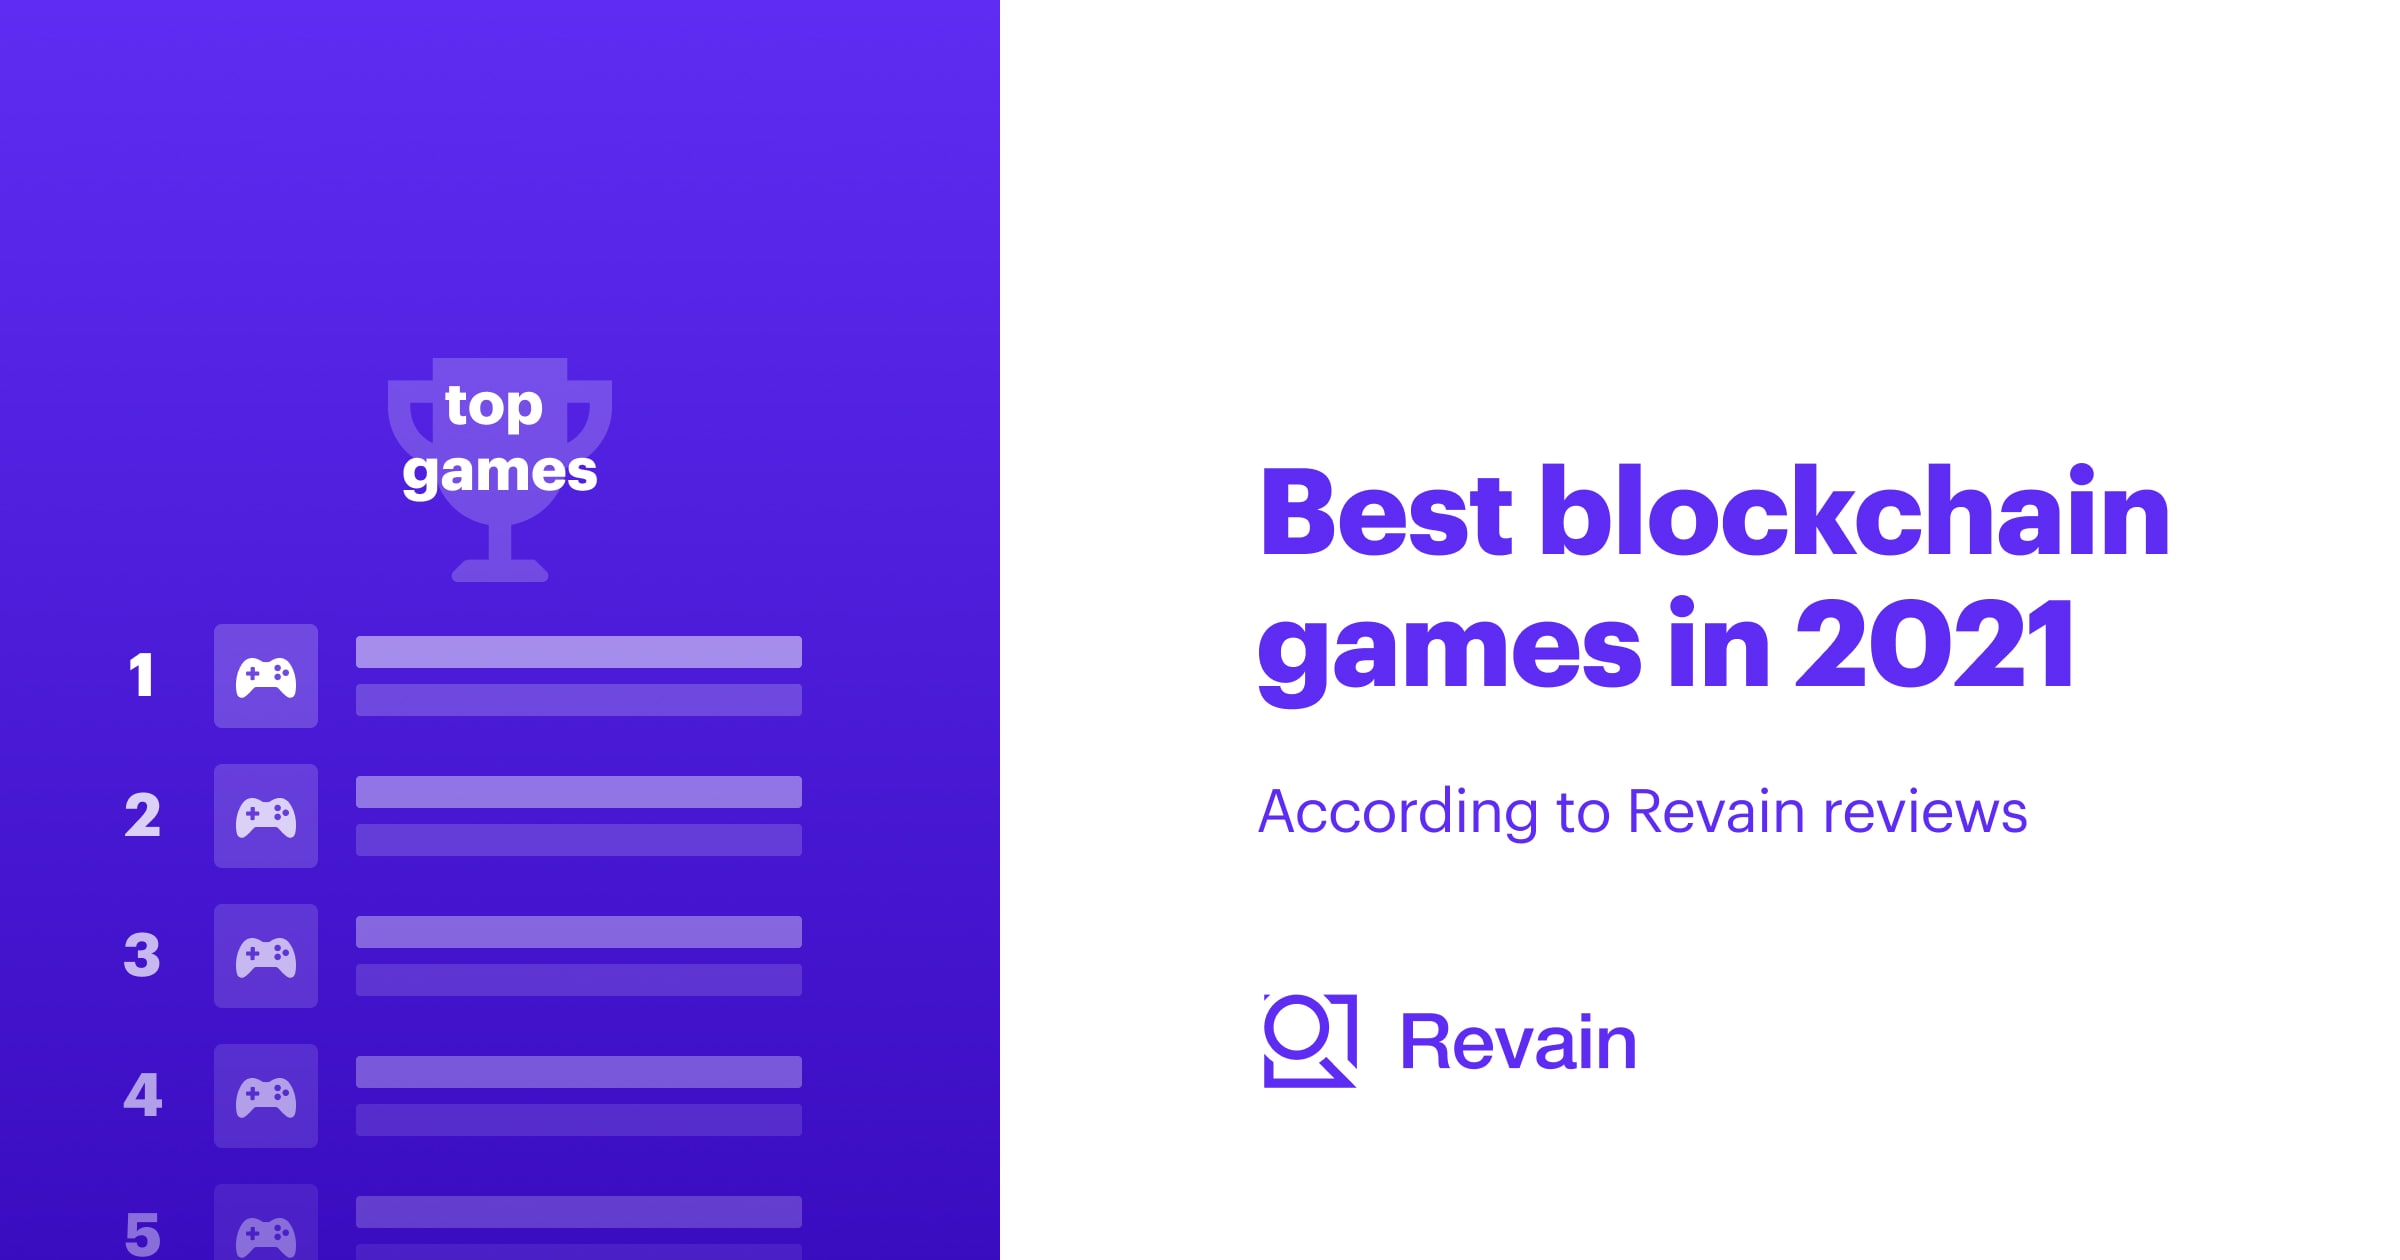 Best blockchain games in 2021, according to Revain reviews